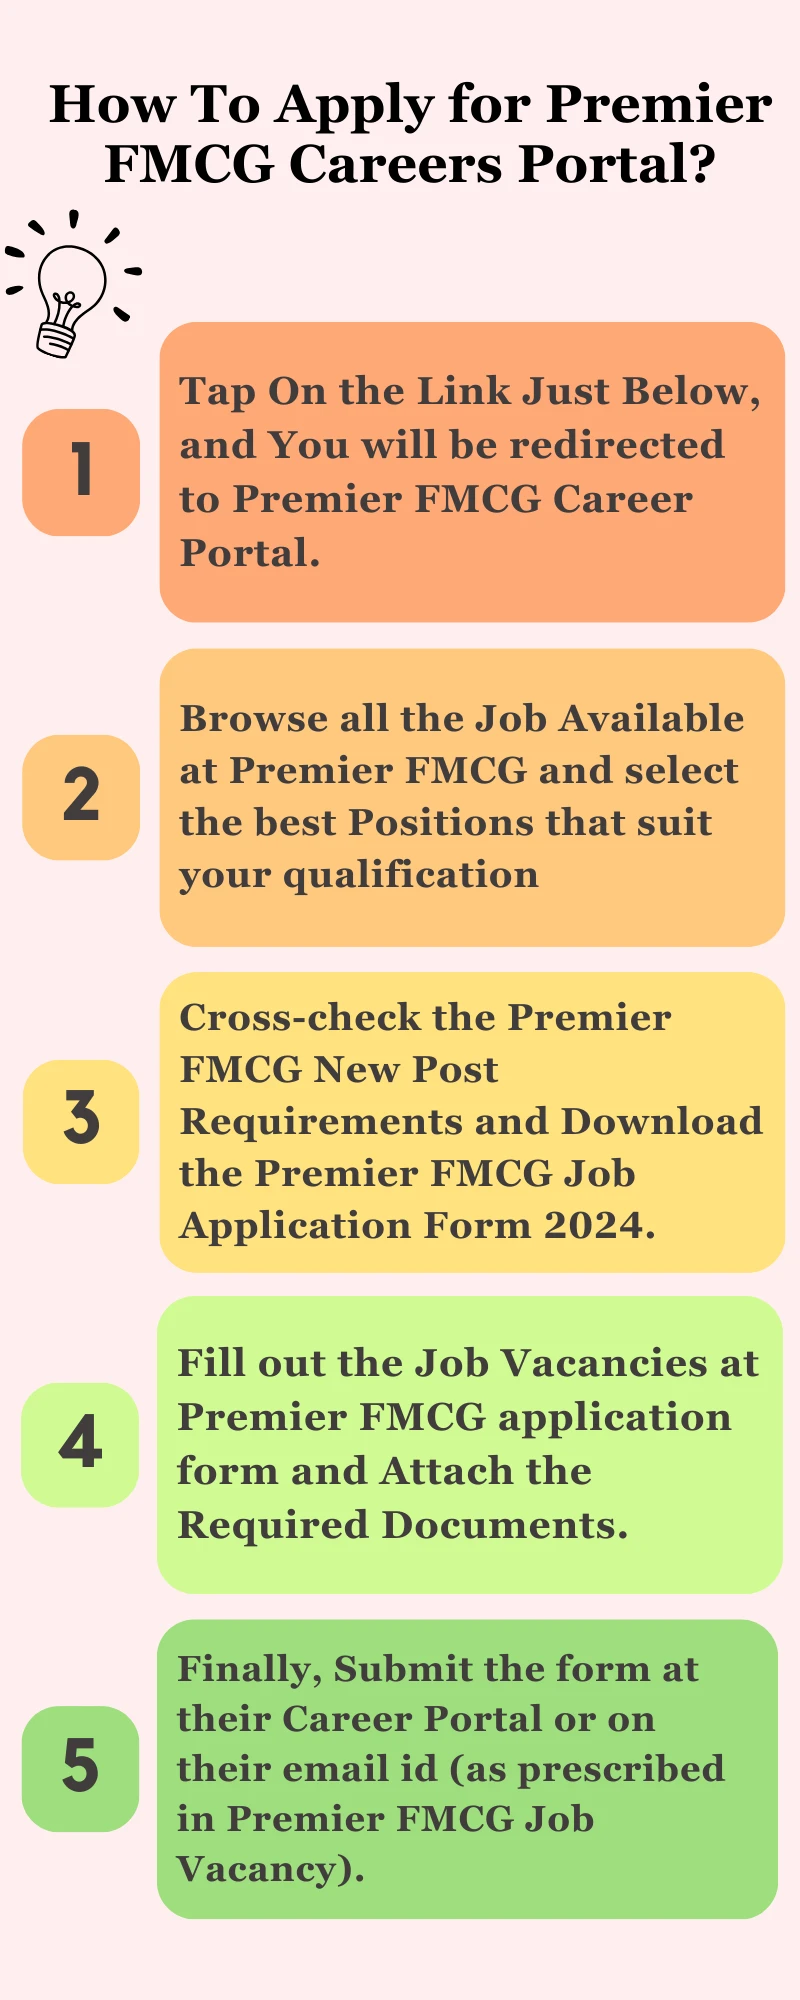 How To Apply for Premier FMCG Careers Portal